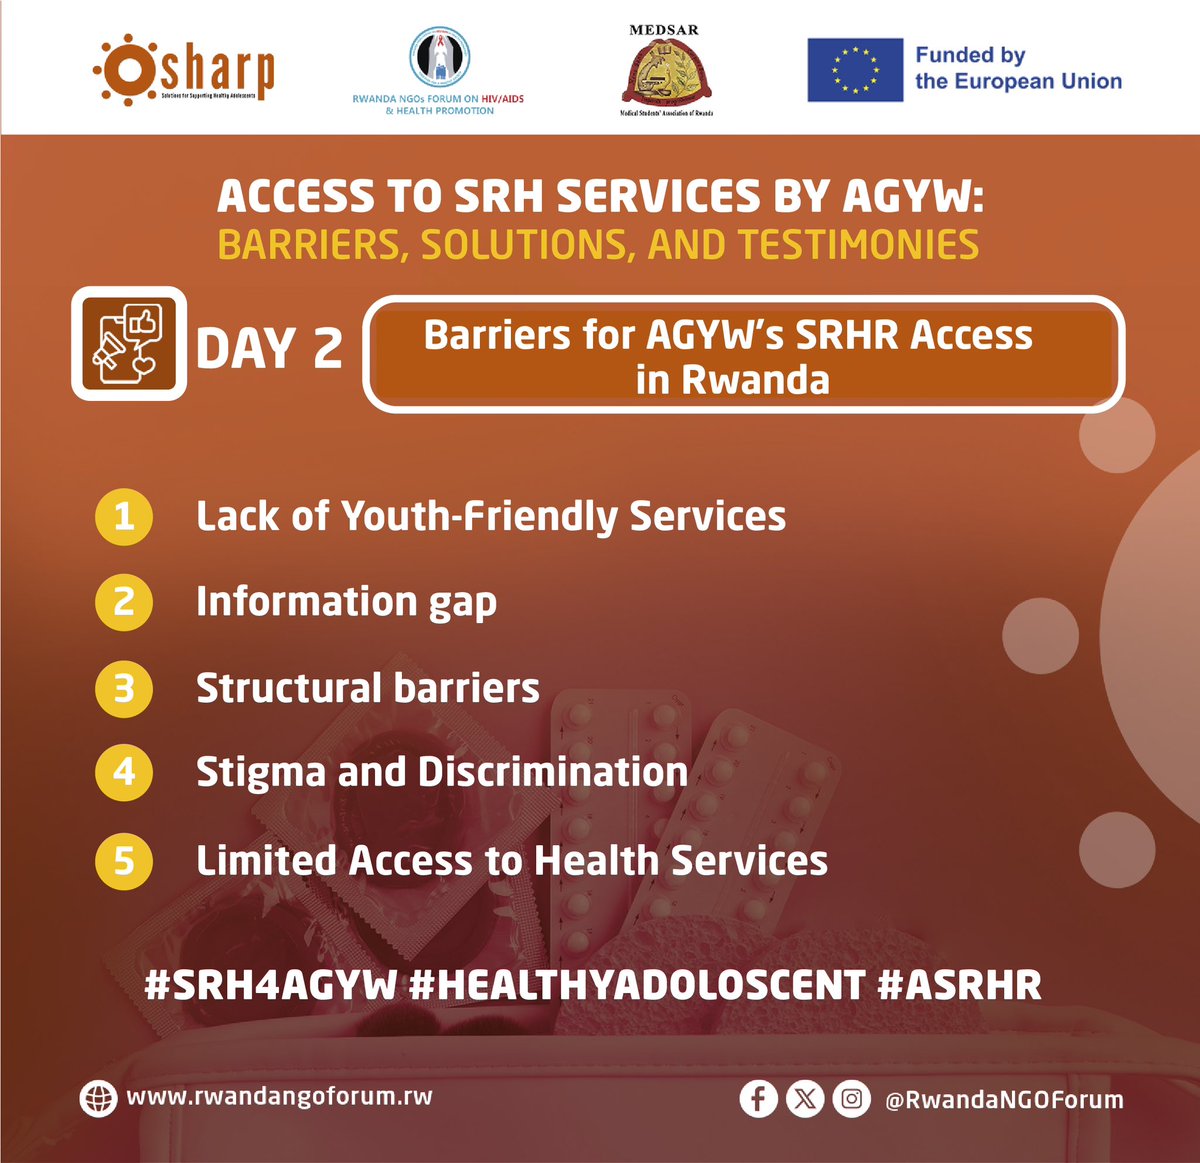 Barriers for AGYW's SRHR Access in Rwanda 1. Lack of Youth-Friendly Services: Few facilities cater to AGYW's needs Inadequate training for providers. 2. Information gap: Insufficient awareness campaigns Lack of accurate SRHR information. 3. Structural barriers: Legal and…